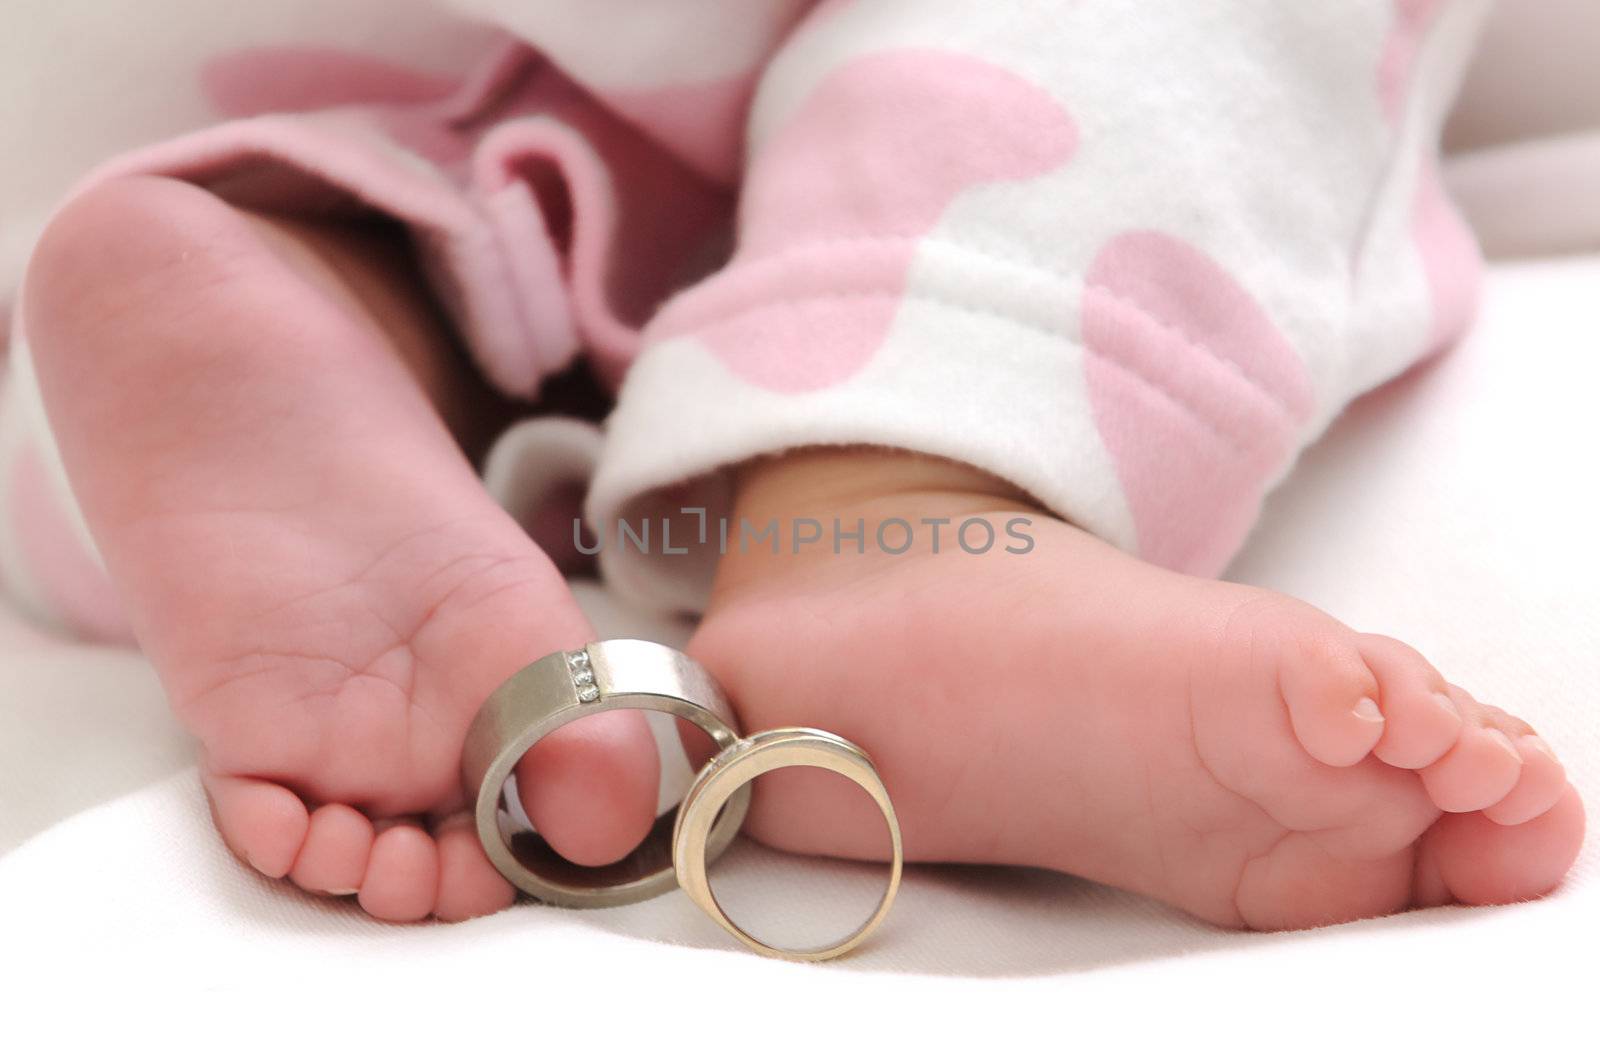 wedding rings on the toes of a baby girl wearing white and pink clothes